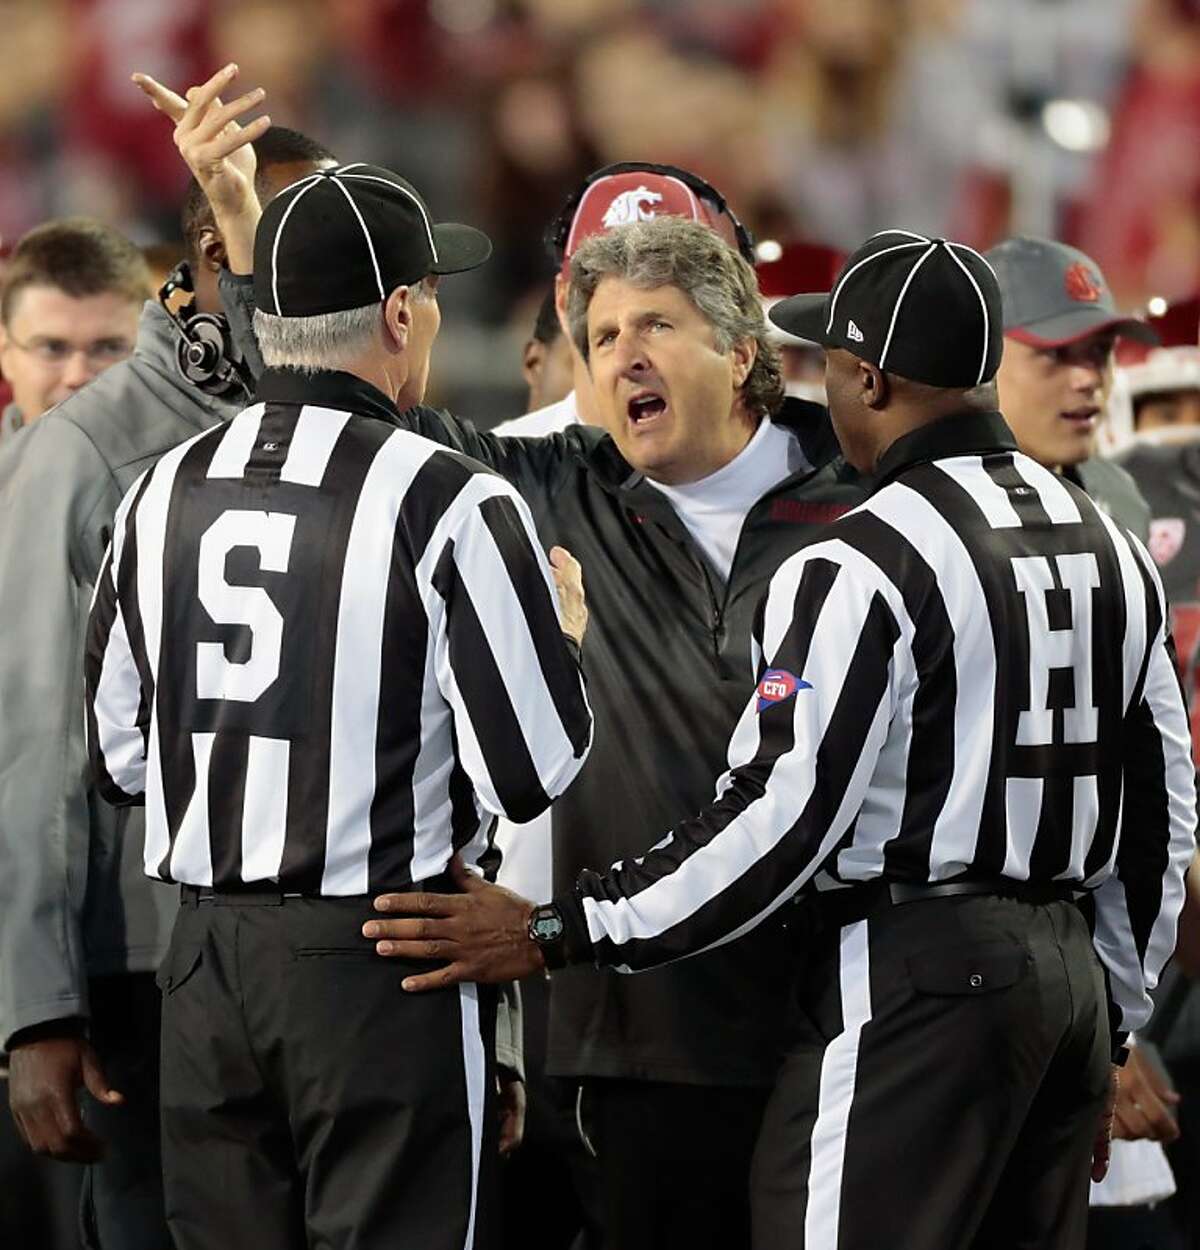 PULLMAN, WA - SEPTEMBER 21: Head coach Mike Leach of the Washington State Cougars disputes a call during the game against the Idaho Vandals at Martin Stadium on September 21, 2013 in Pullman, Washington. (Photo by William Mancebo/Getty Images)